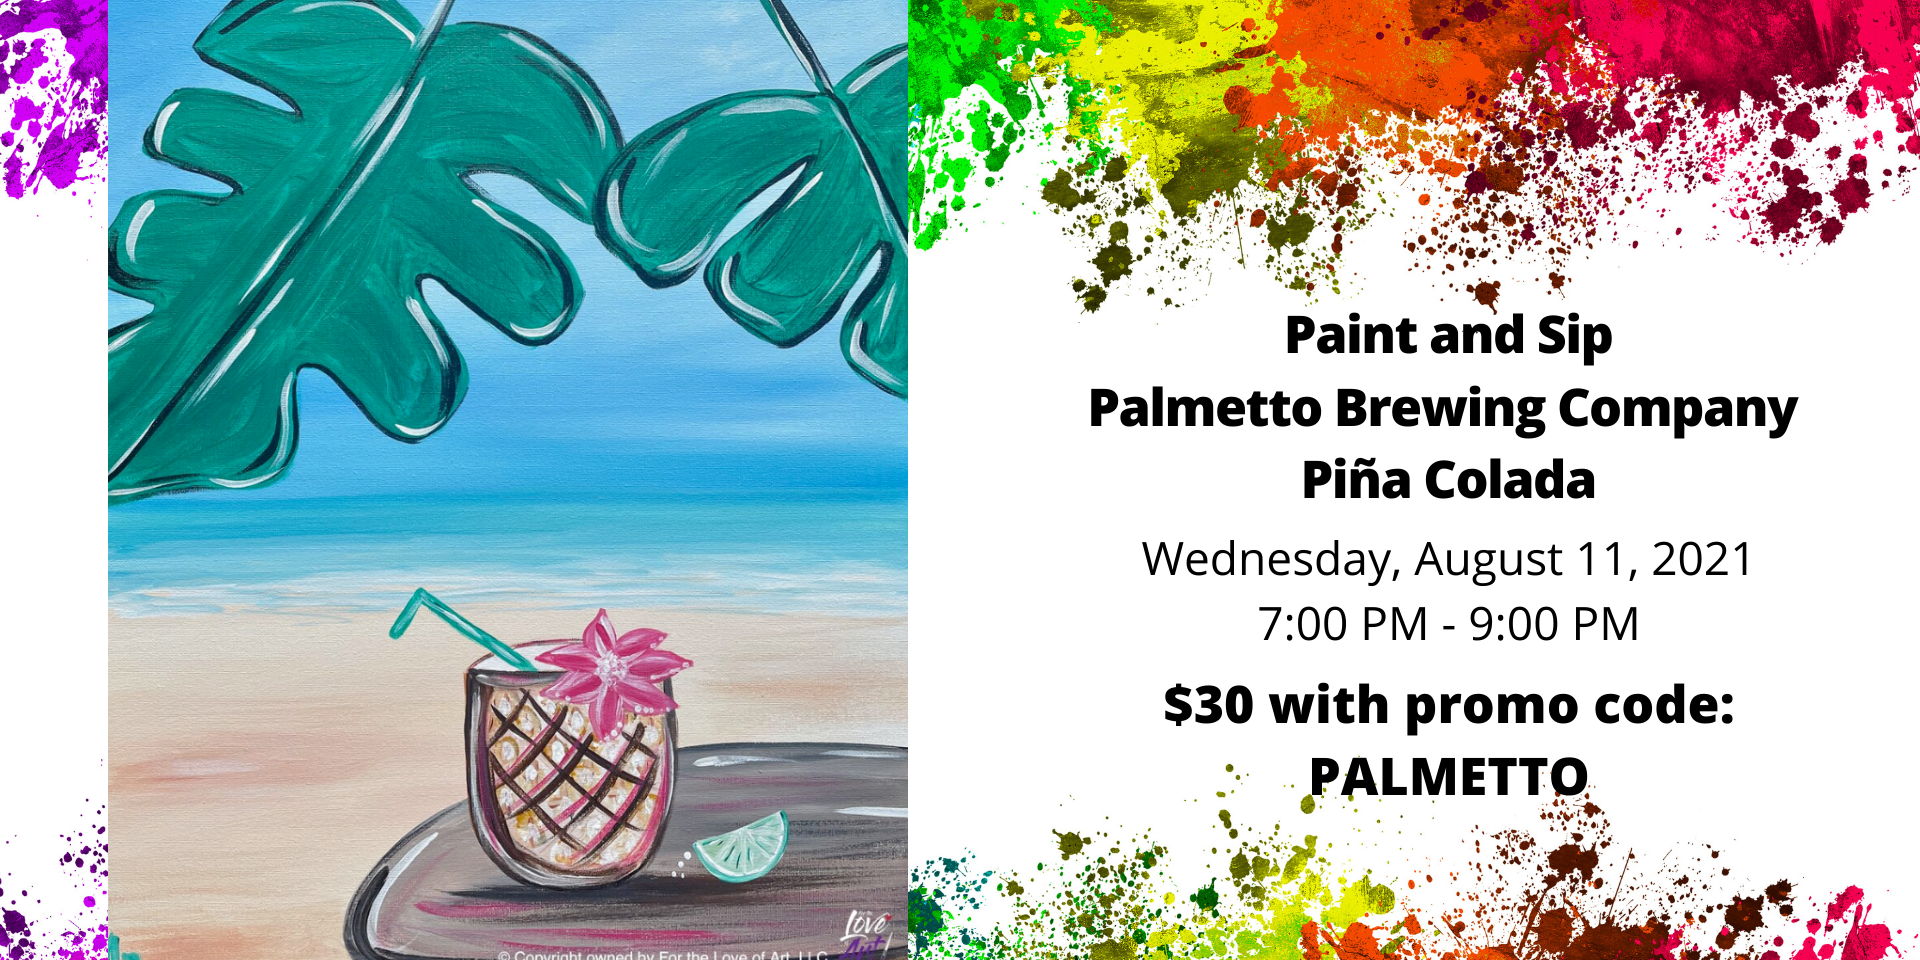 Paint and Sip @ Palmetto Brewing Co. promotional image